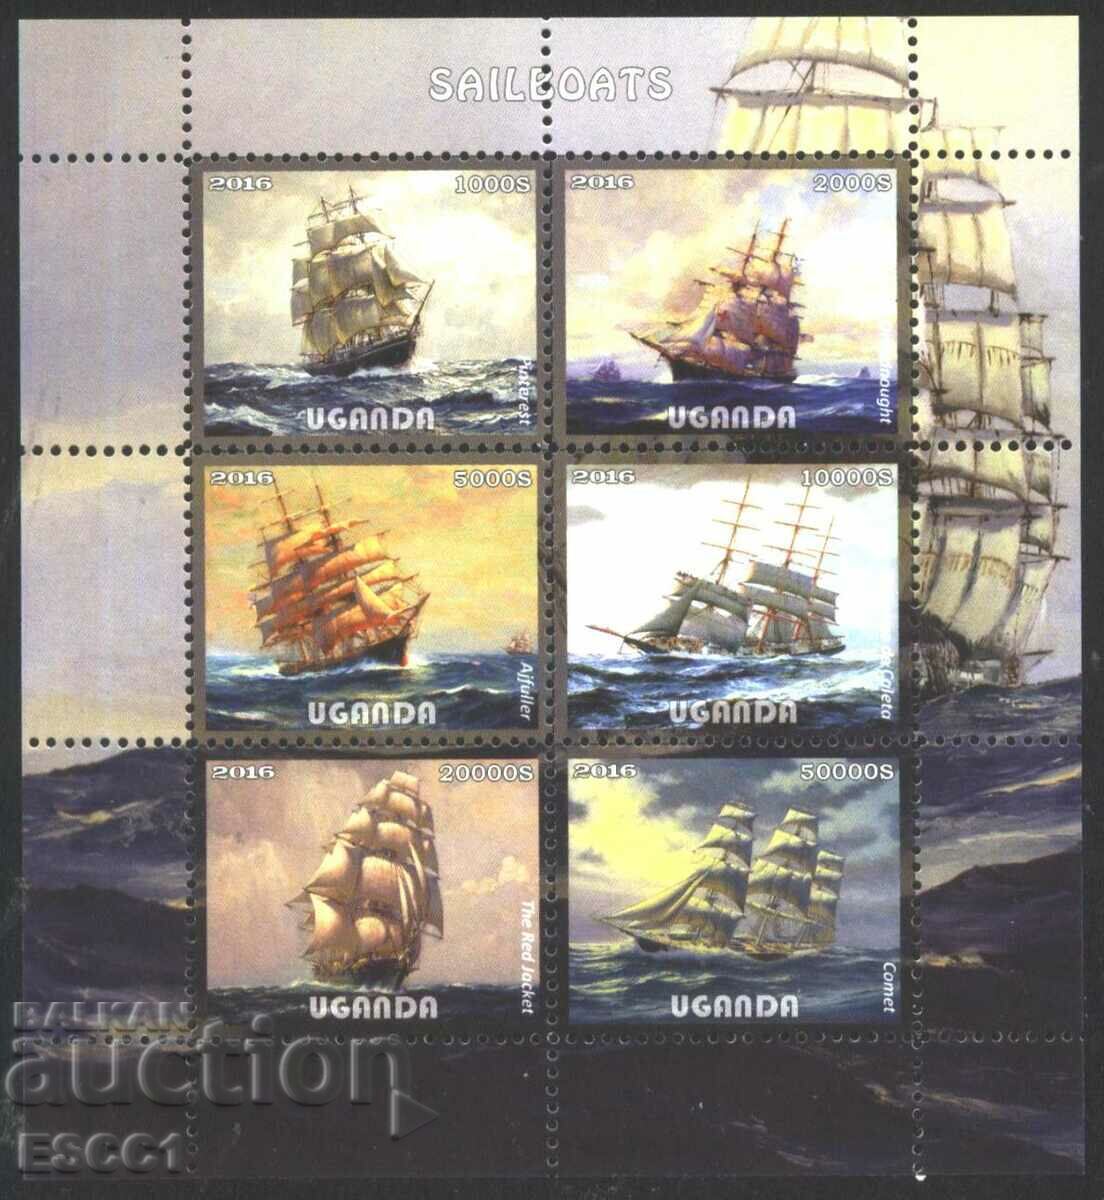 Clean stamps in small sheet Ships Sailboats 2016 from Uganda